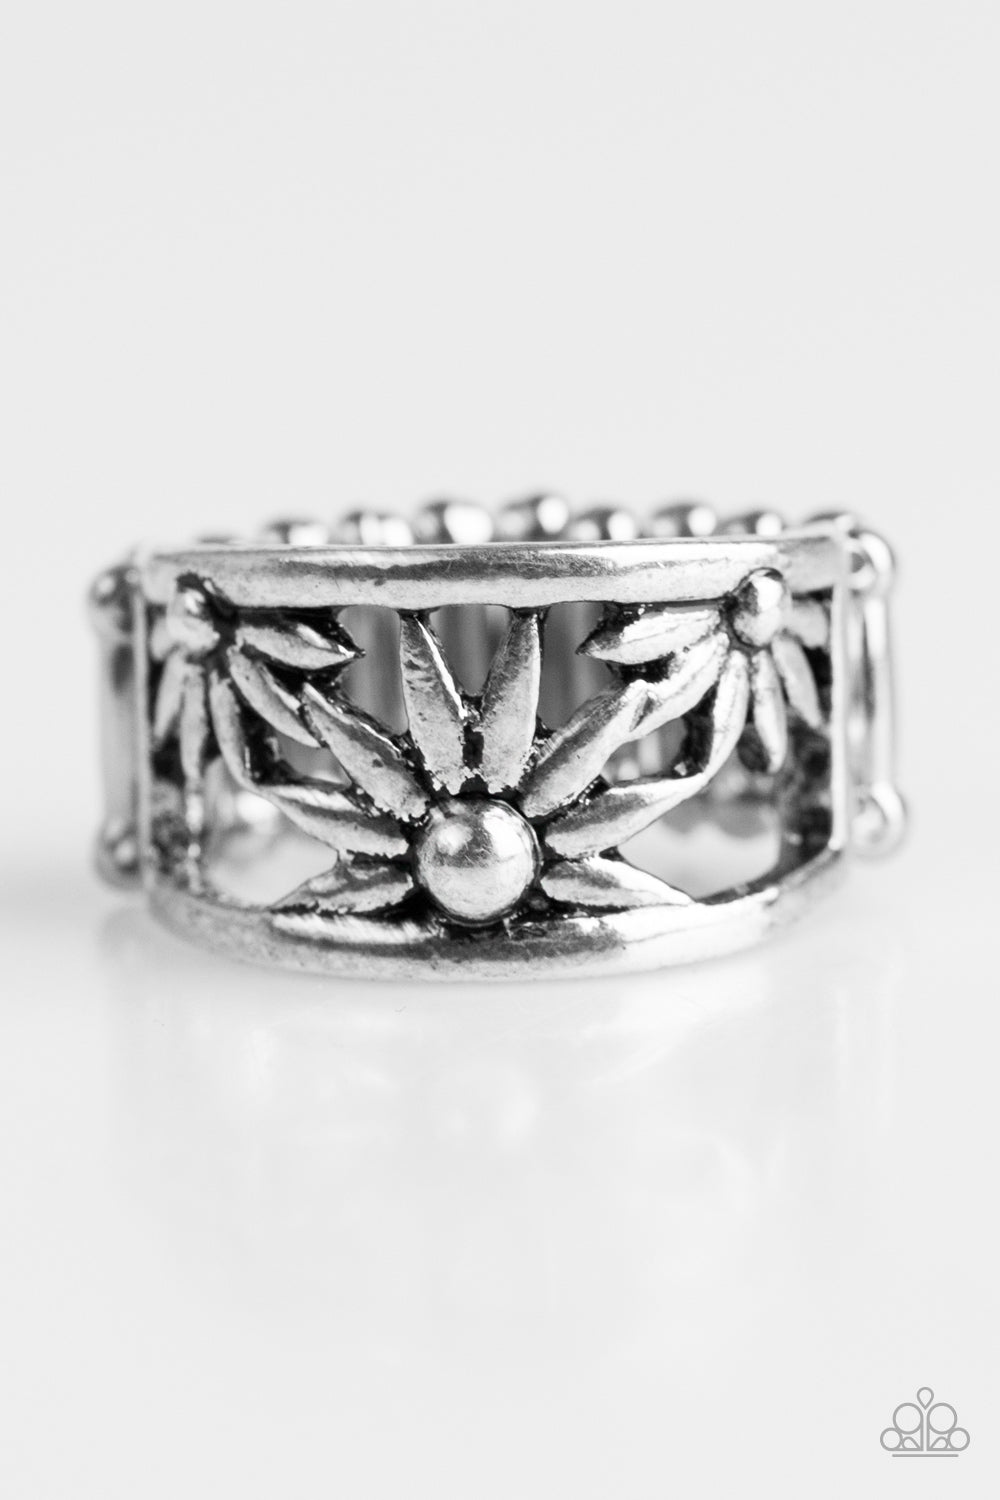 let-a-thousand-wildflowers-bloom-silver-p4wh-svxx-089xx